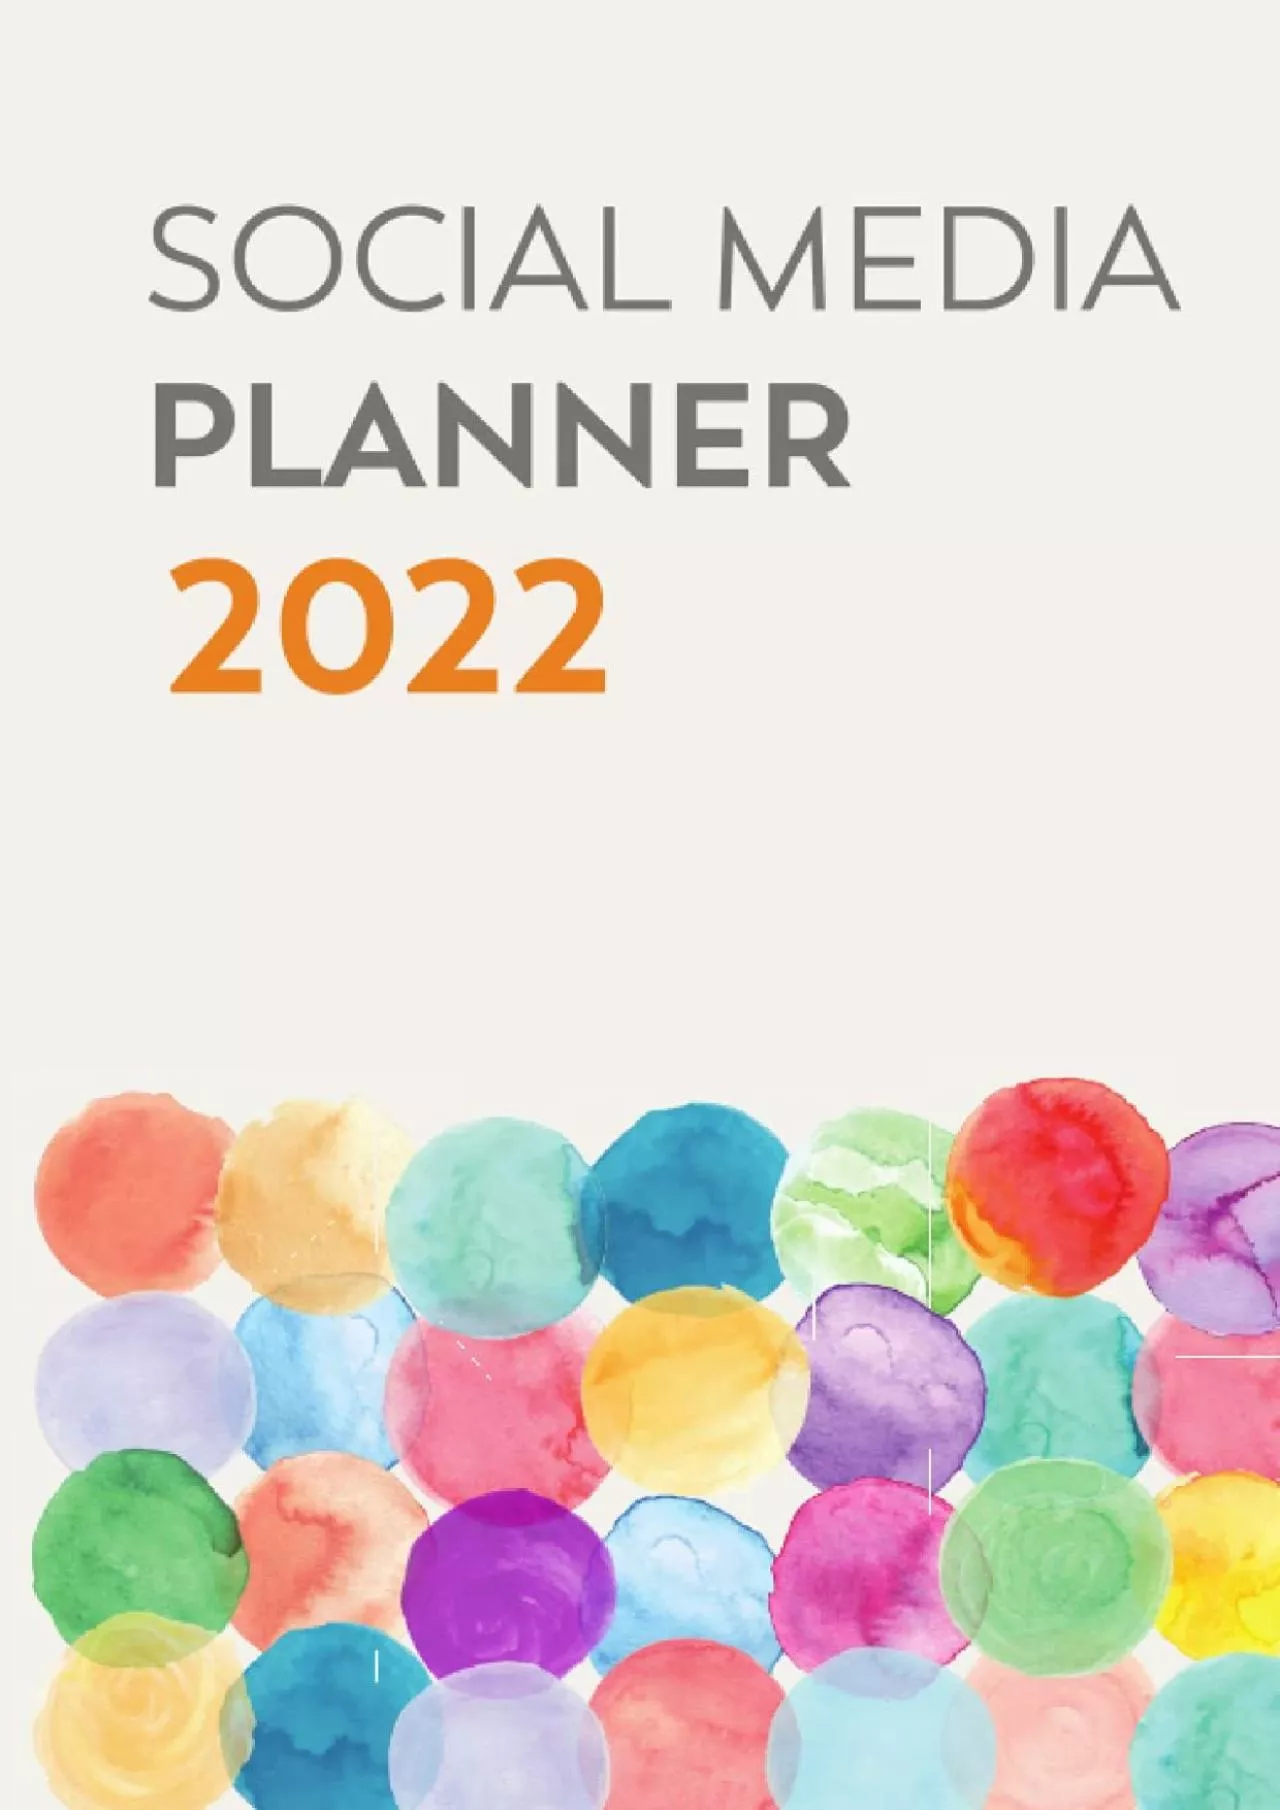 Social Media Planner 2022: Plan Your Social Media Posting Schedule and Content Weekly